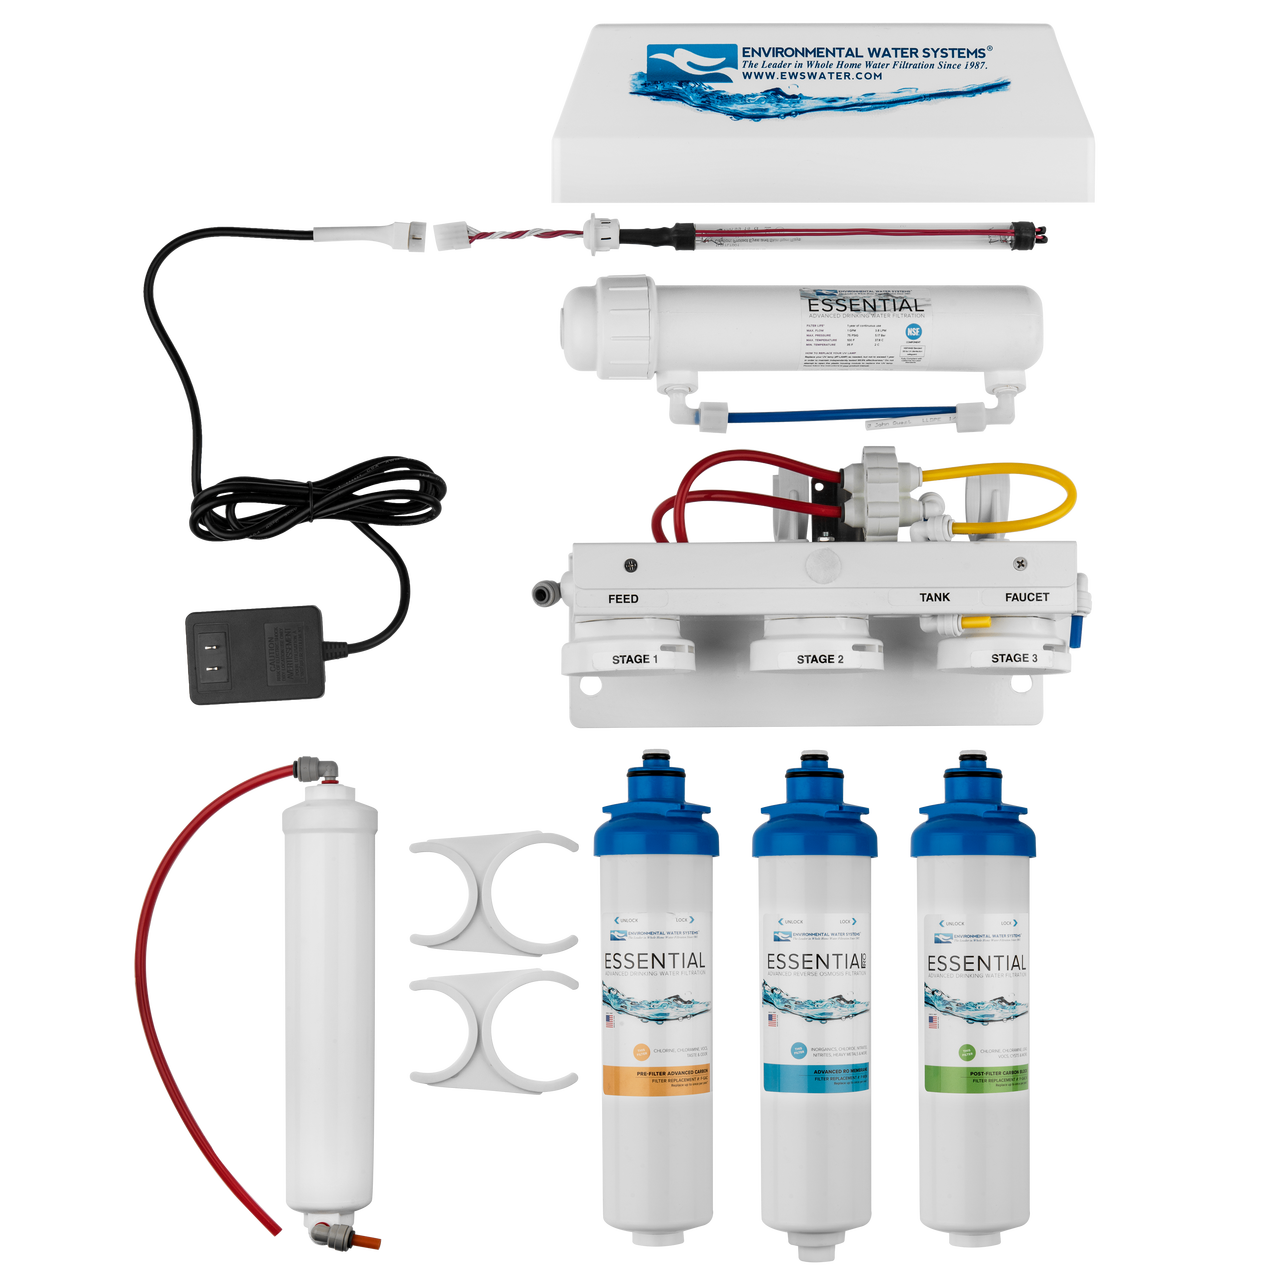 ESSENTIAL RO Four-Stage Reverse Osmosis System with Ultraviolet Protection (Model #: RO4-UV)